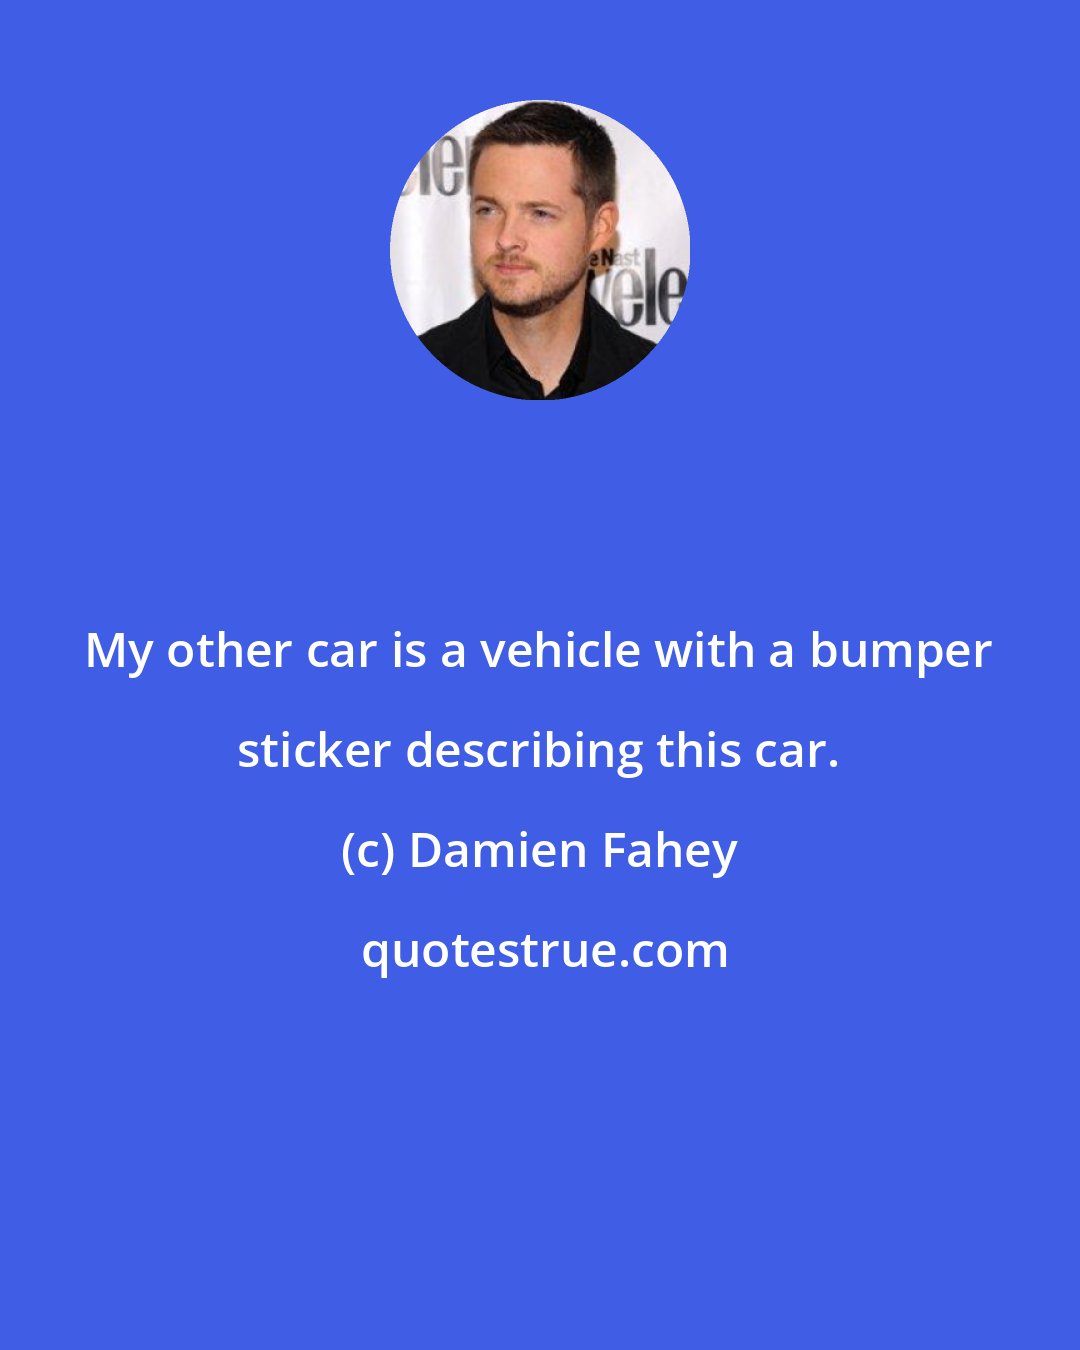 Damien Fahey: My other car is a vehicle with a bumper sticker describing this car.